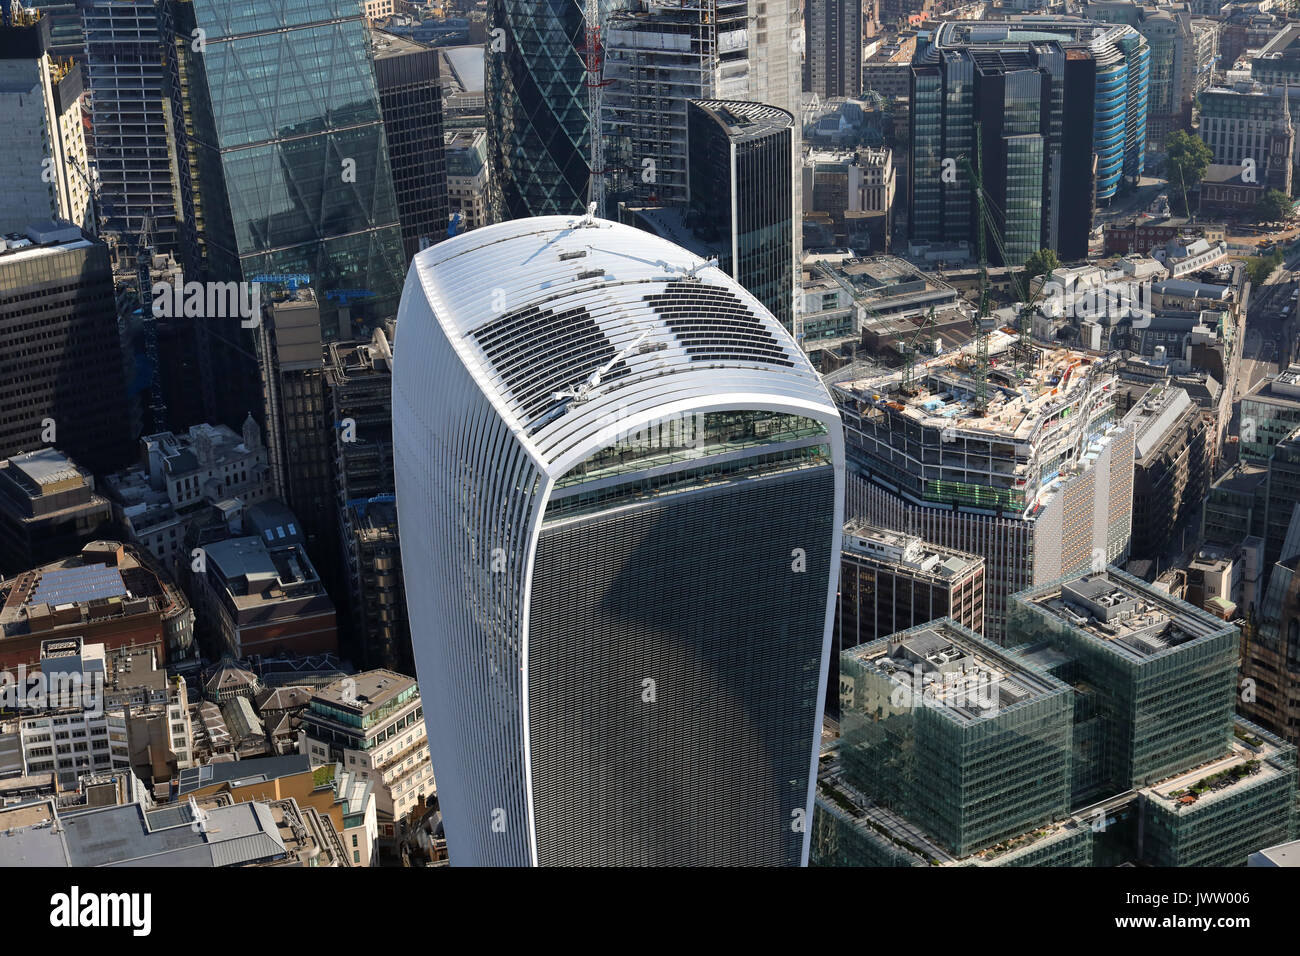 aerial view of the top of the Walkie Talkie building in the City of London, UK Stock Photo